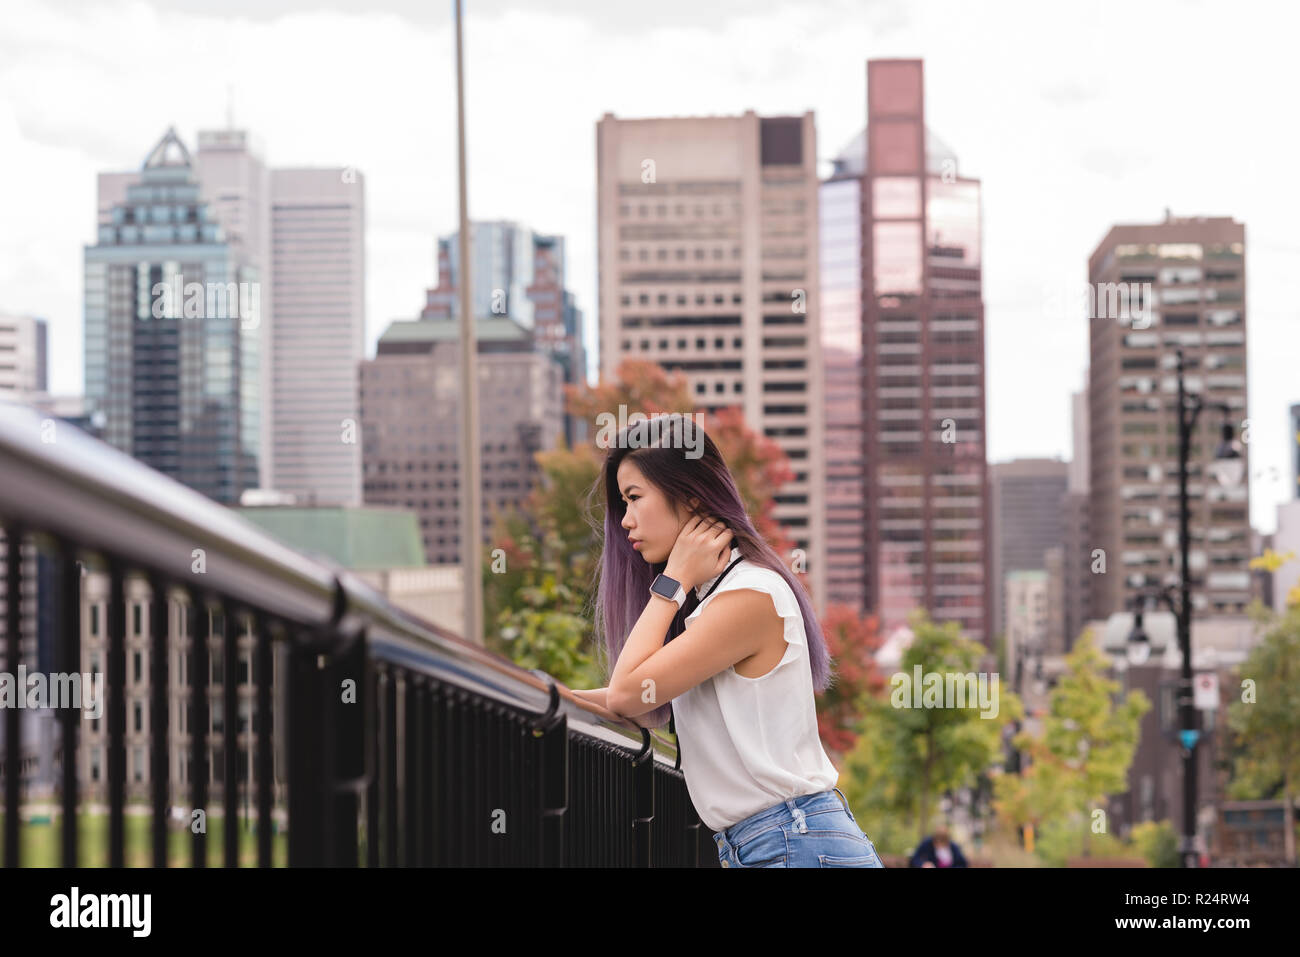 Woman leaning on railing on a sunny day Stock Photo